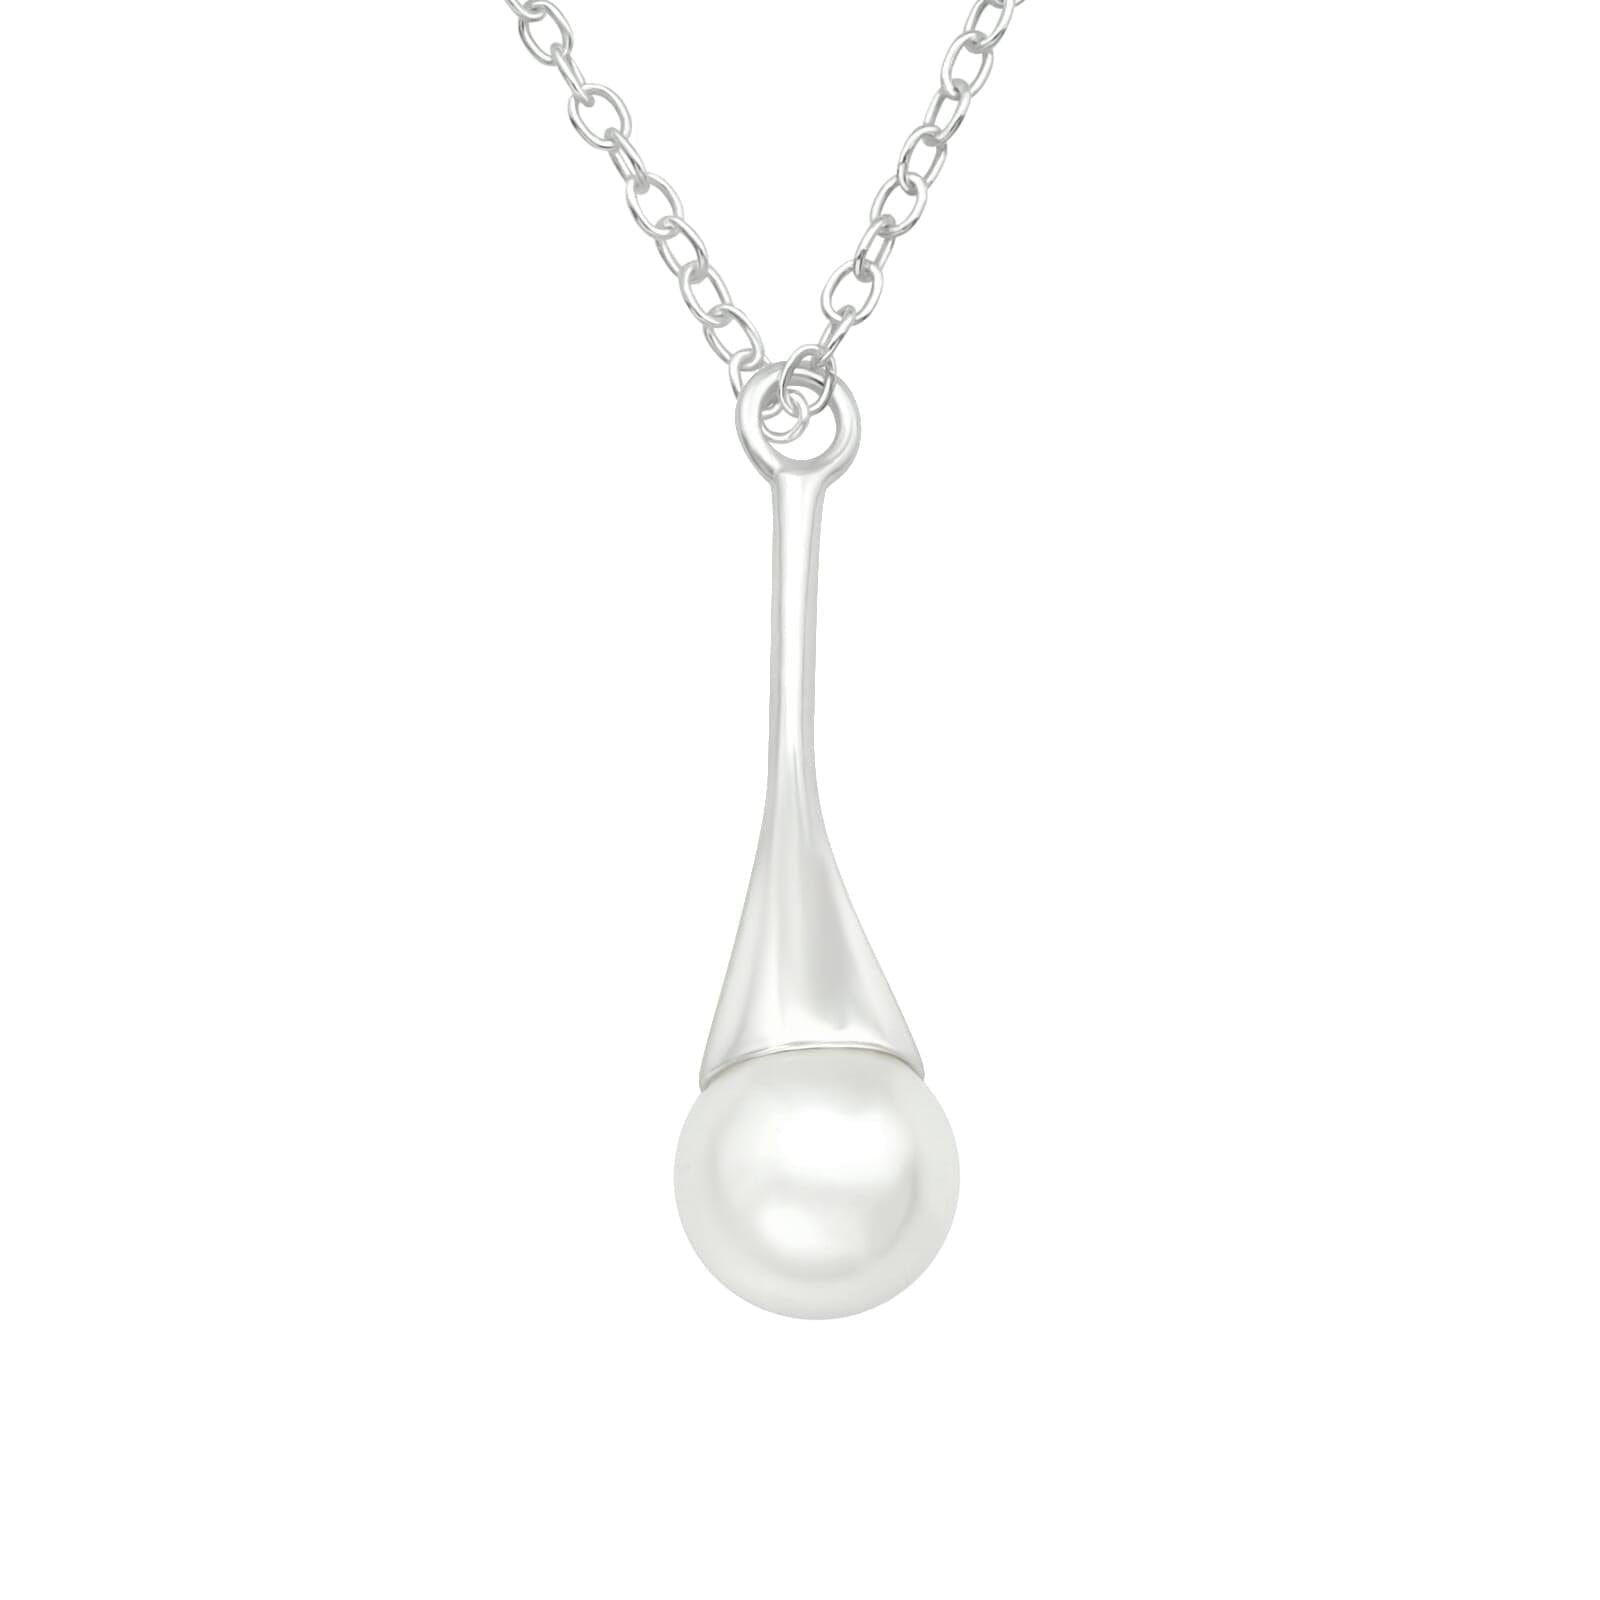 Asfour Loly 925 Sterling Silver Necklace, White